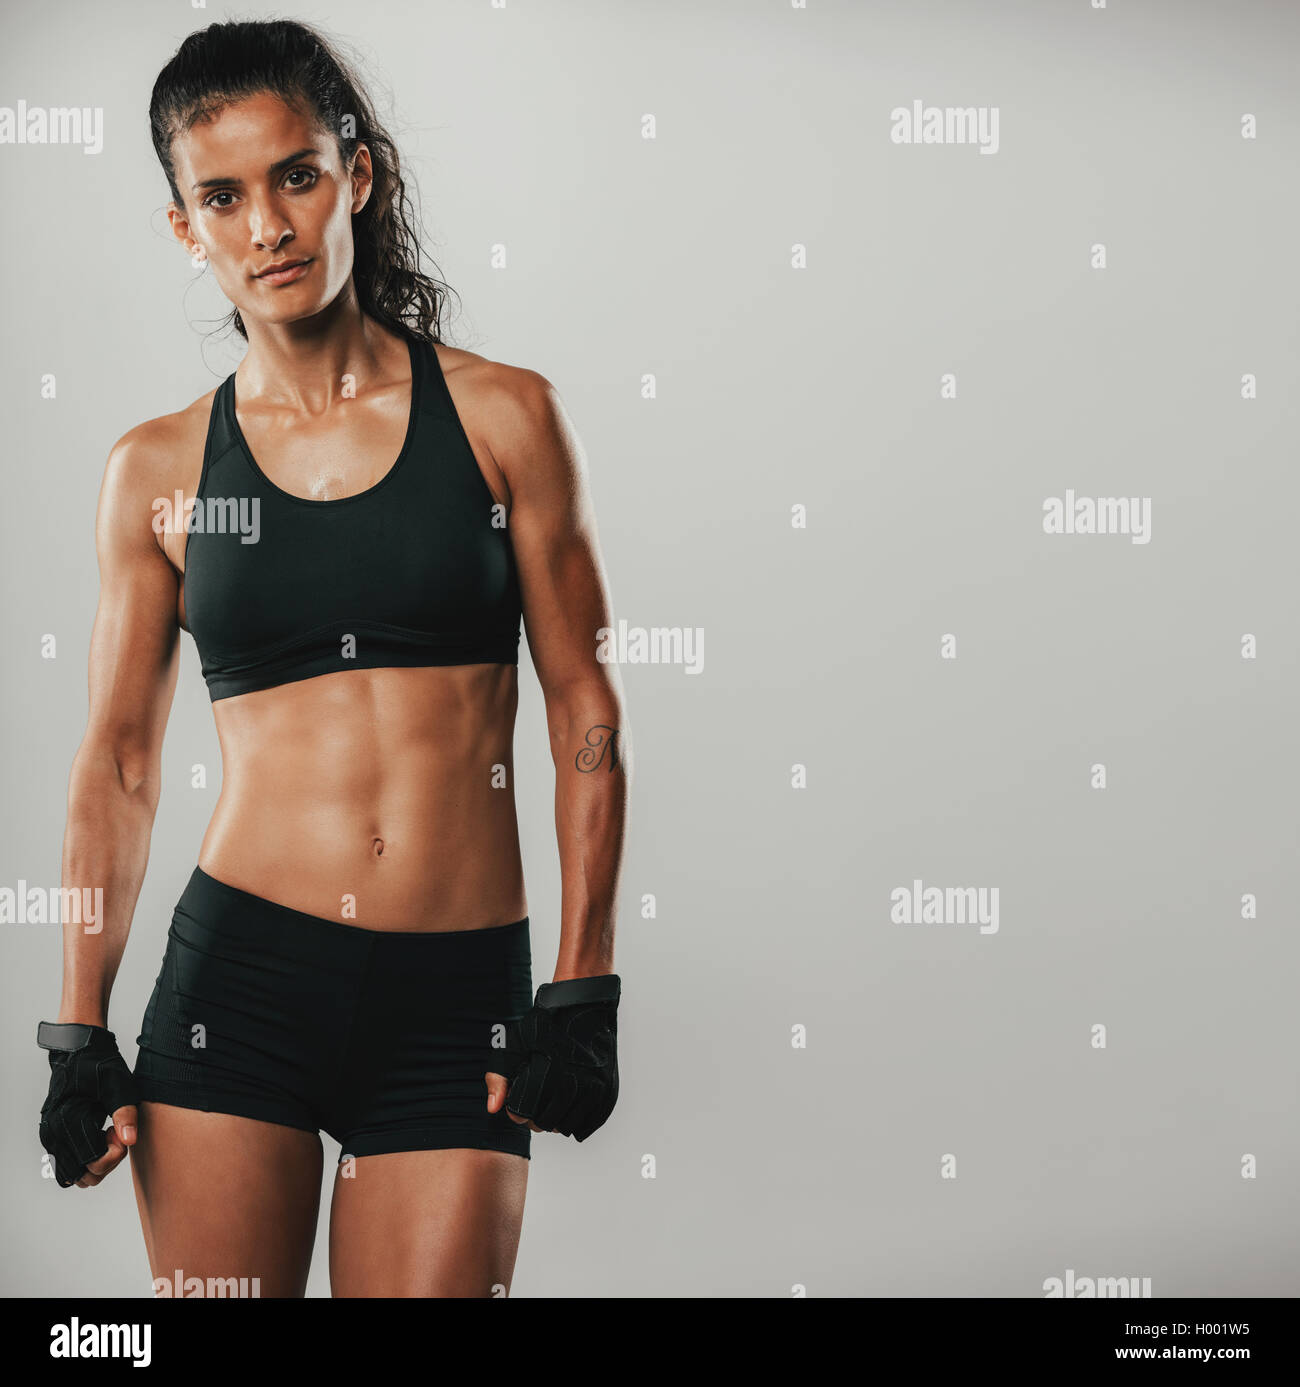 Attractive strong healthy woman in sportswear posing looking at the camera with a serious expression in a fitness and exercise c Stock Photo